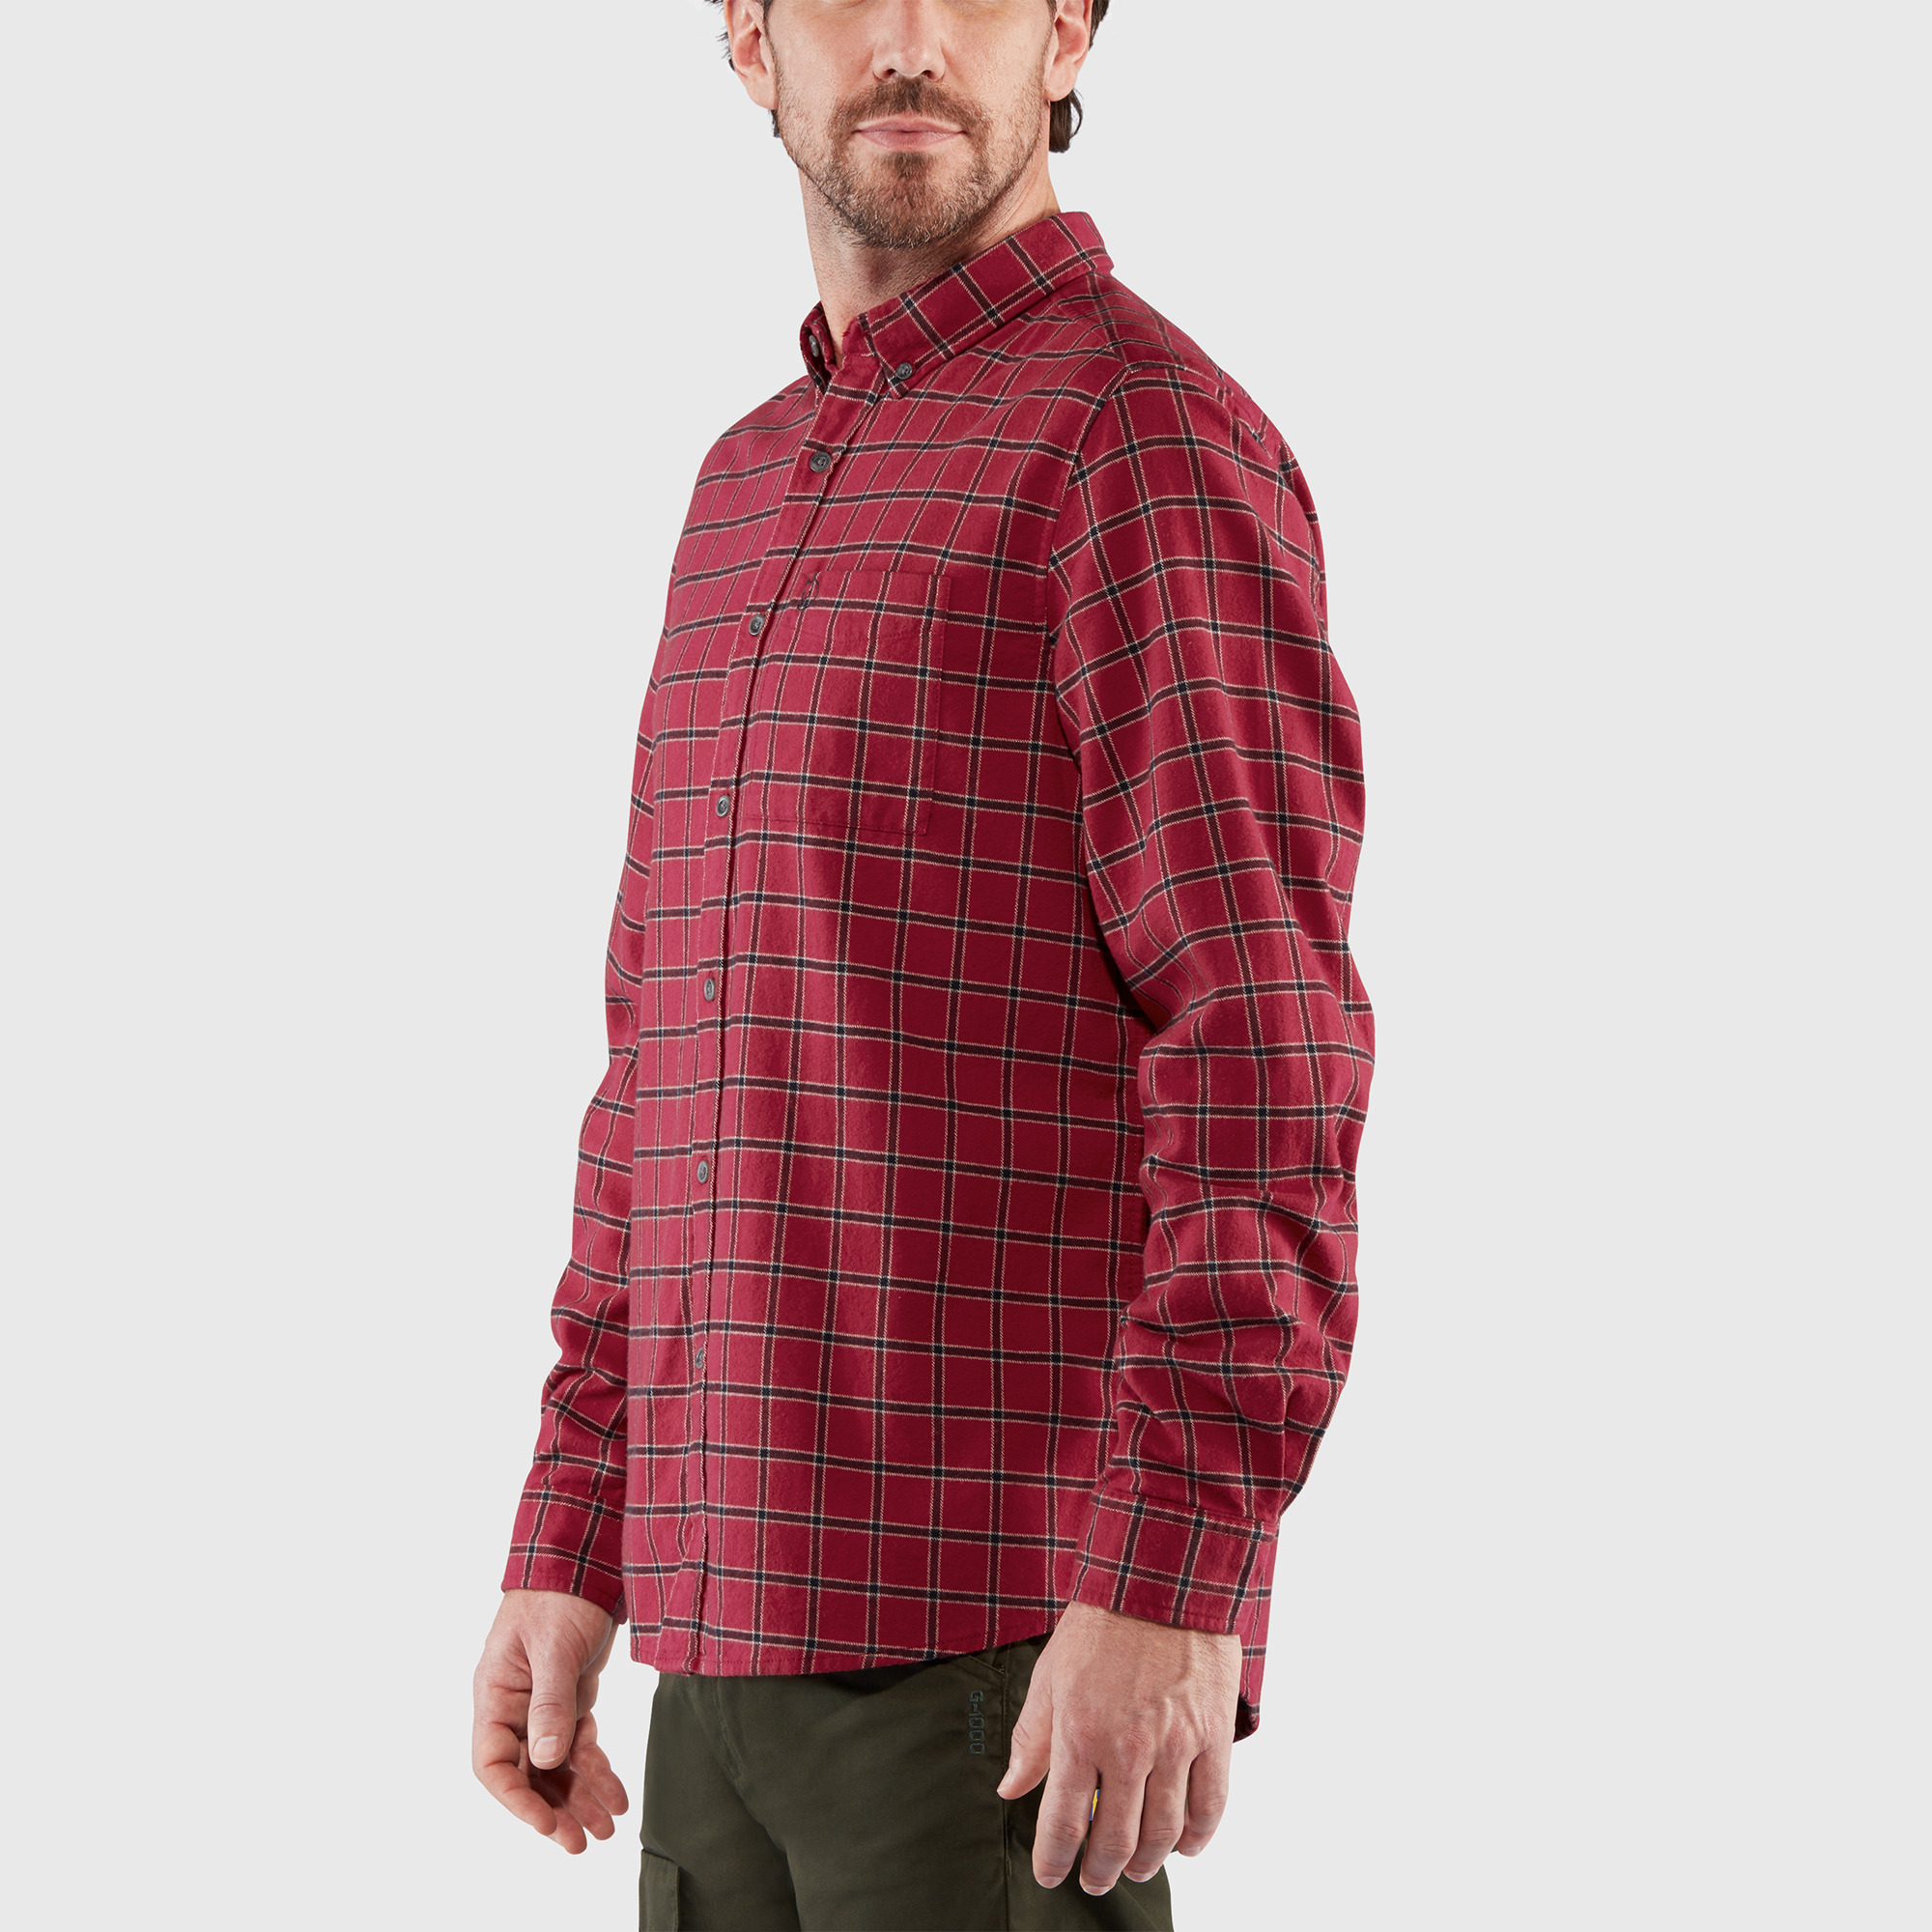 F90830-630 Fjallraven Lappland Flannel Shirt Olive Various Sizes 